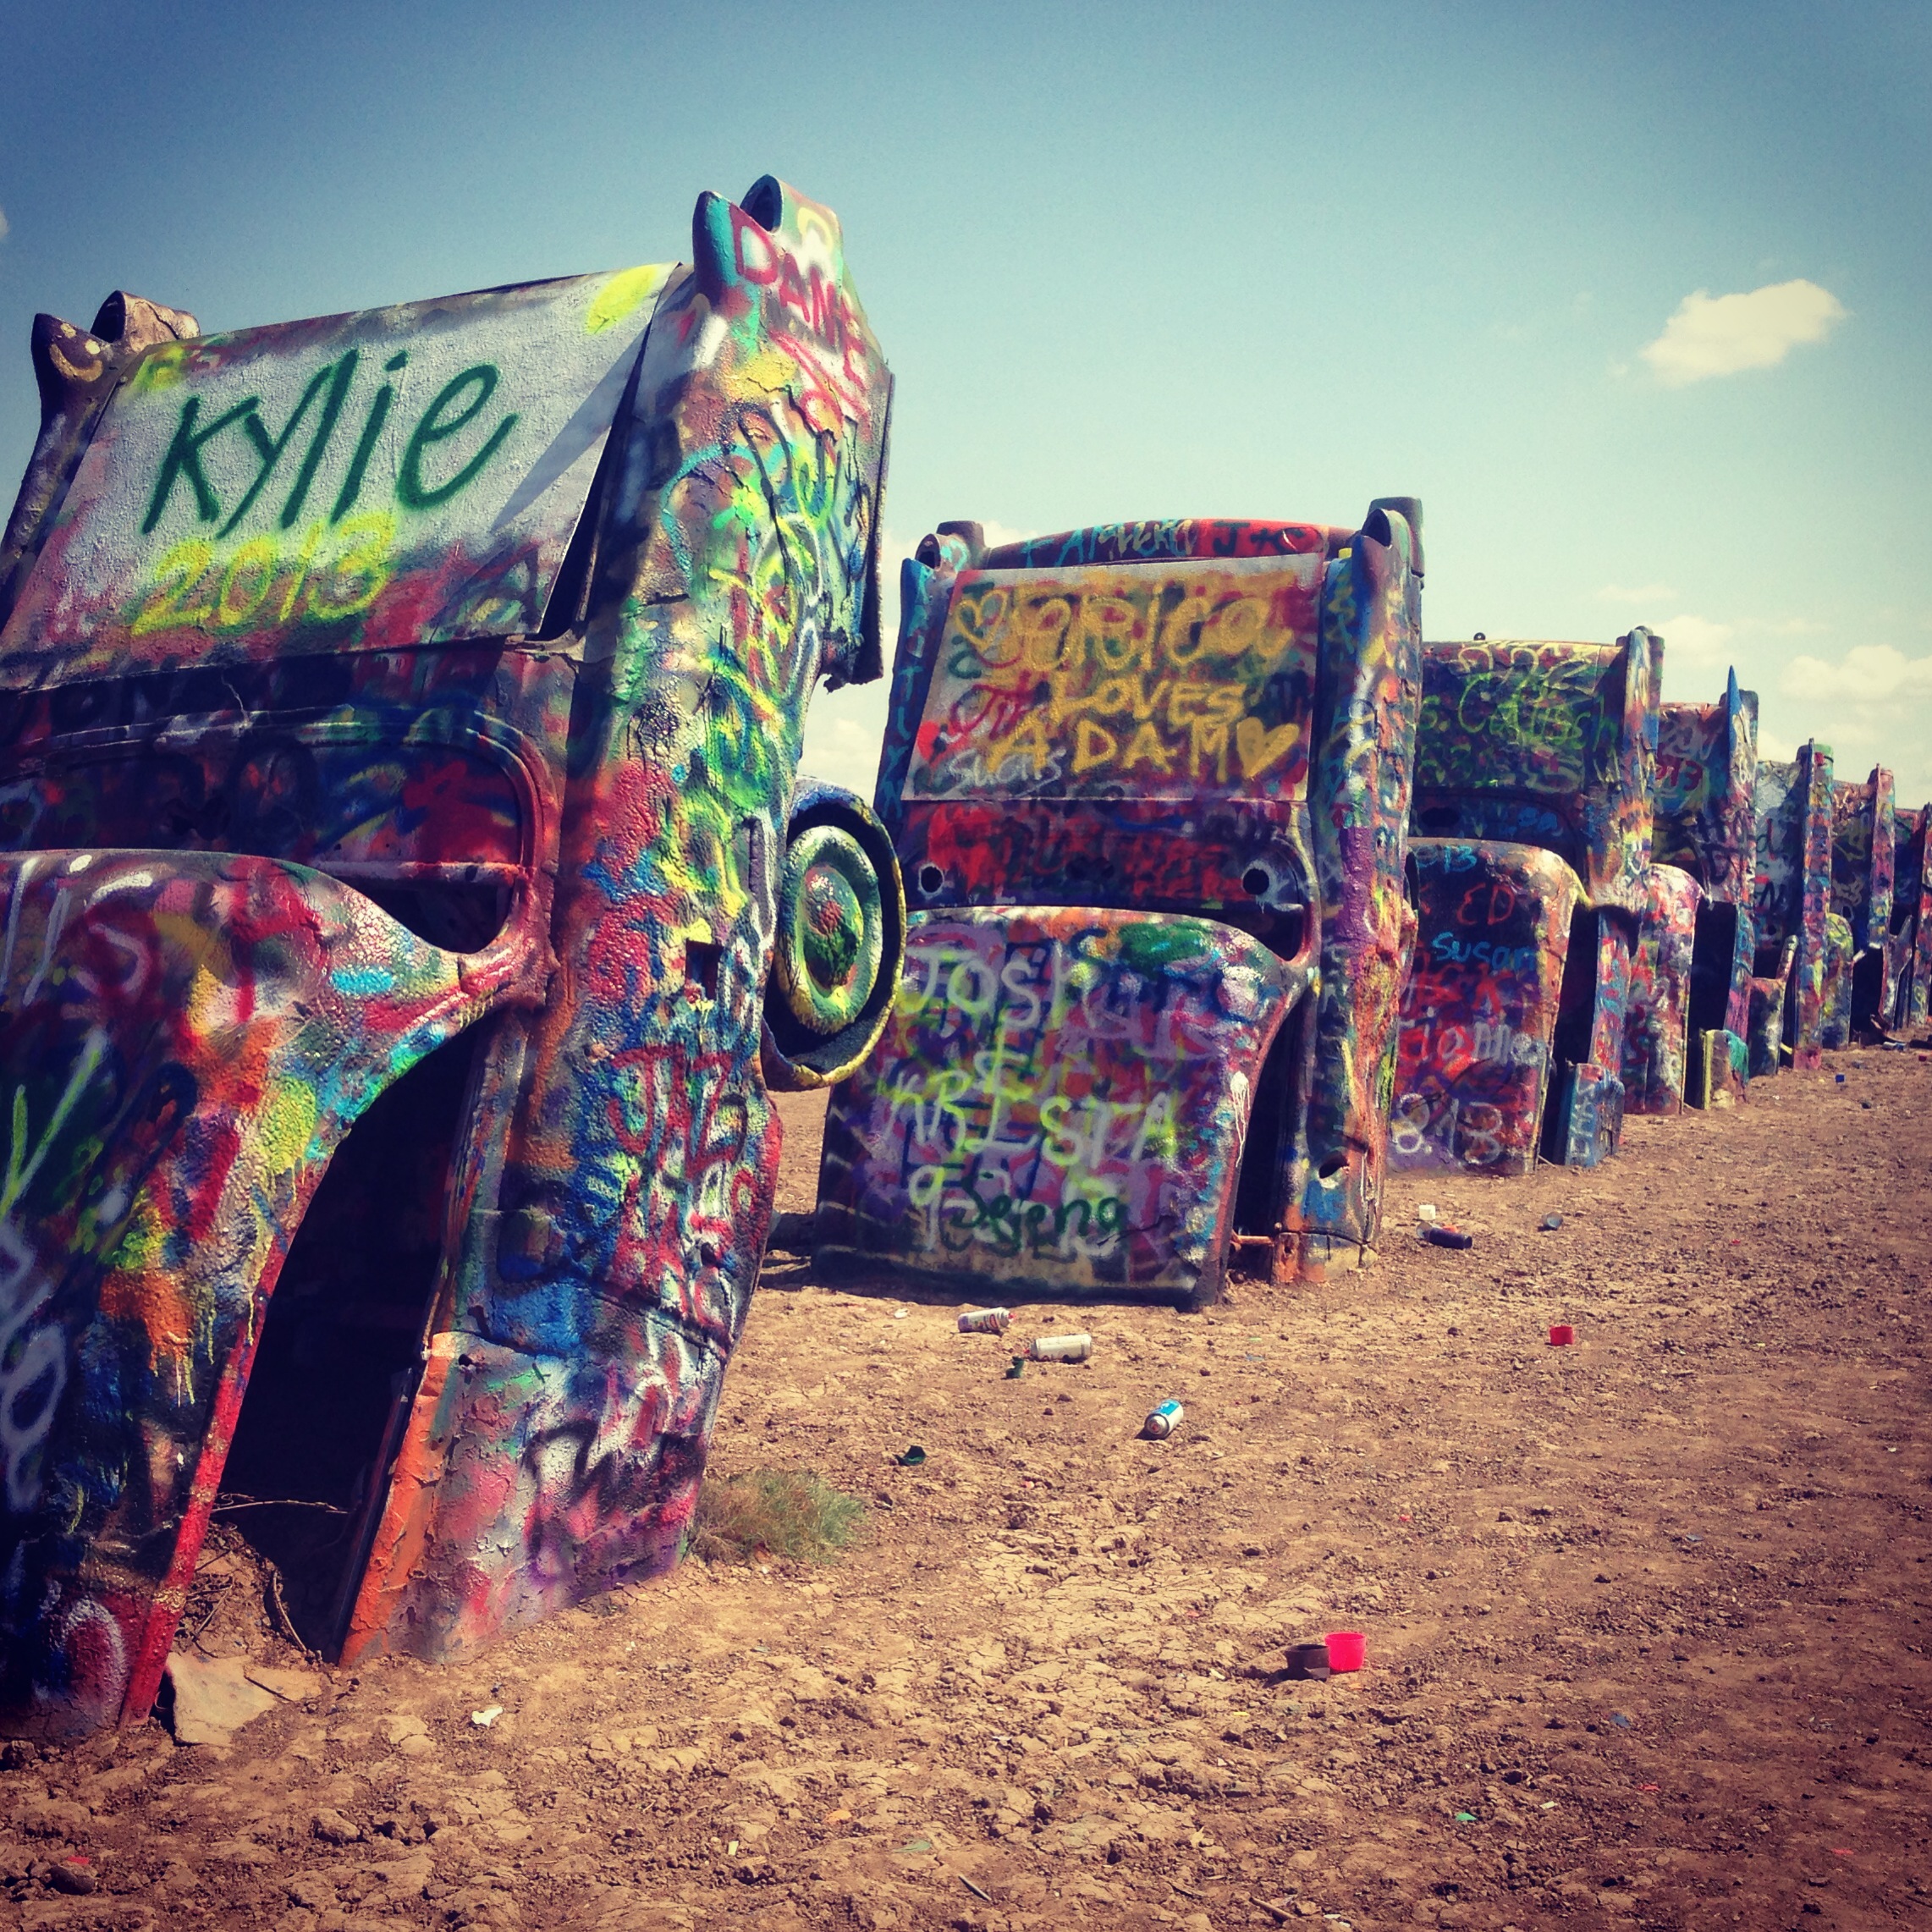 After driving back and forth across the country 5 times, we finally stopped at the Cadillac Ranch in Amarillo, Texas